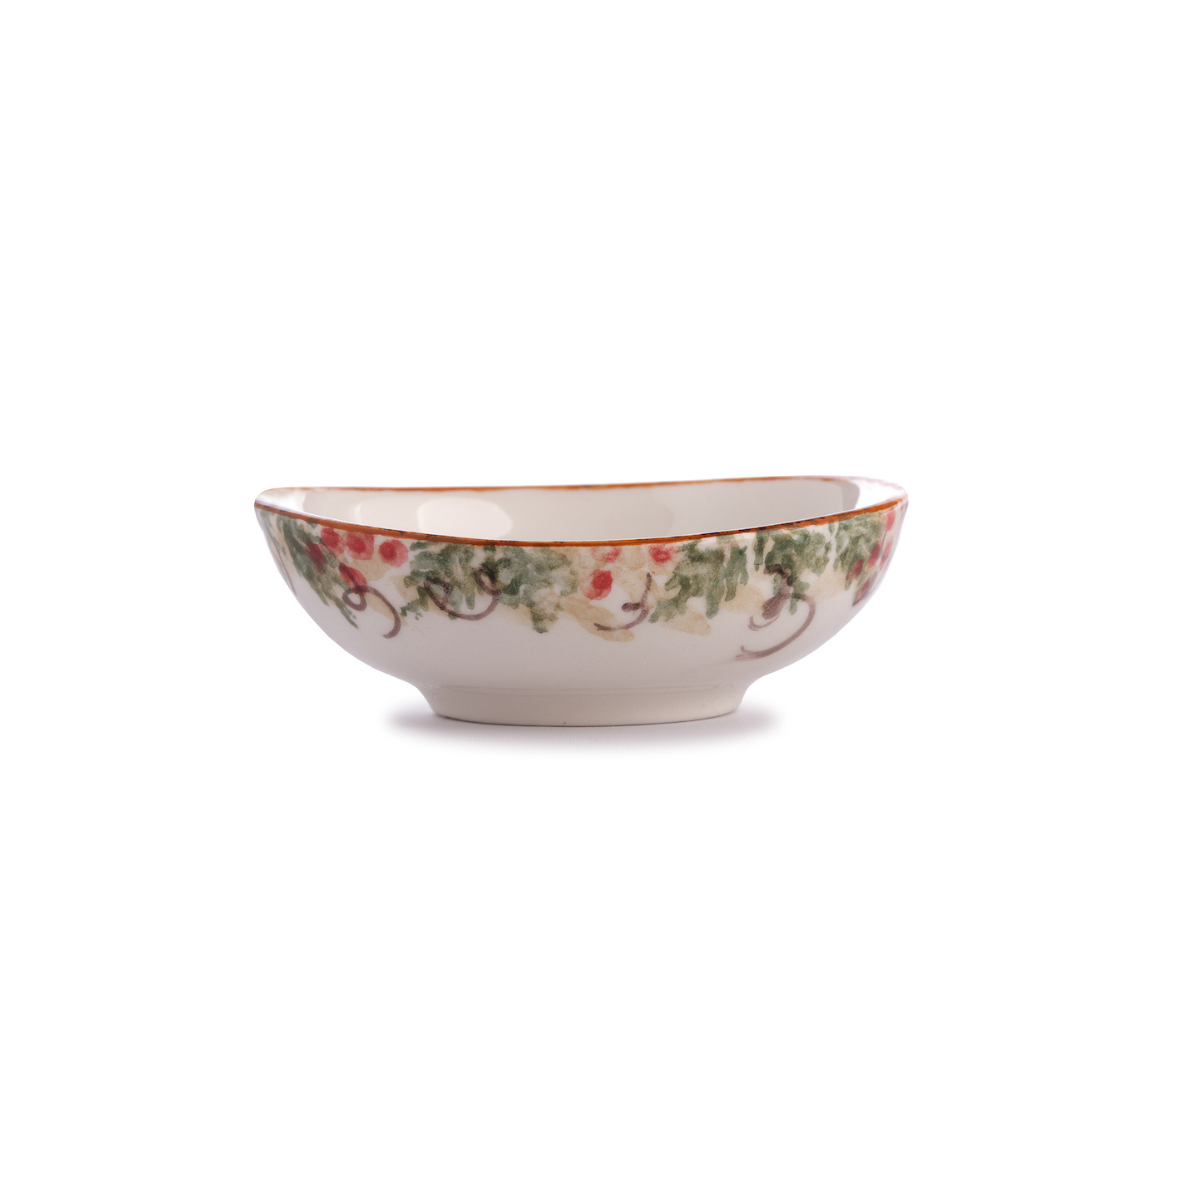 Natale Small Oval Bowl Set of 2